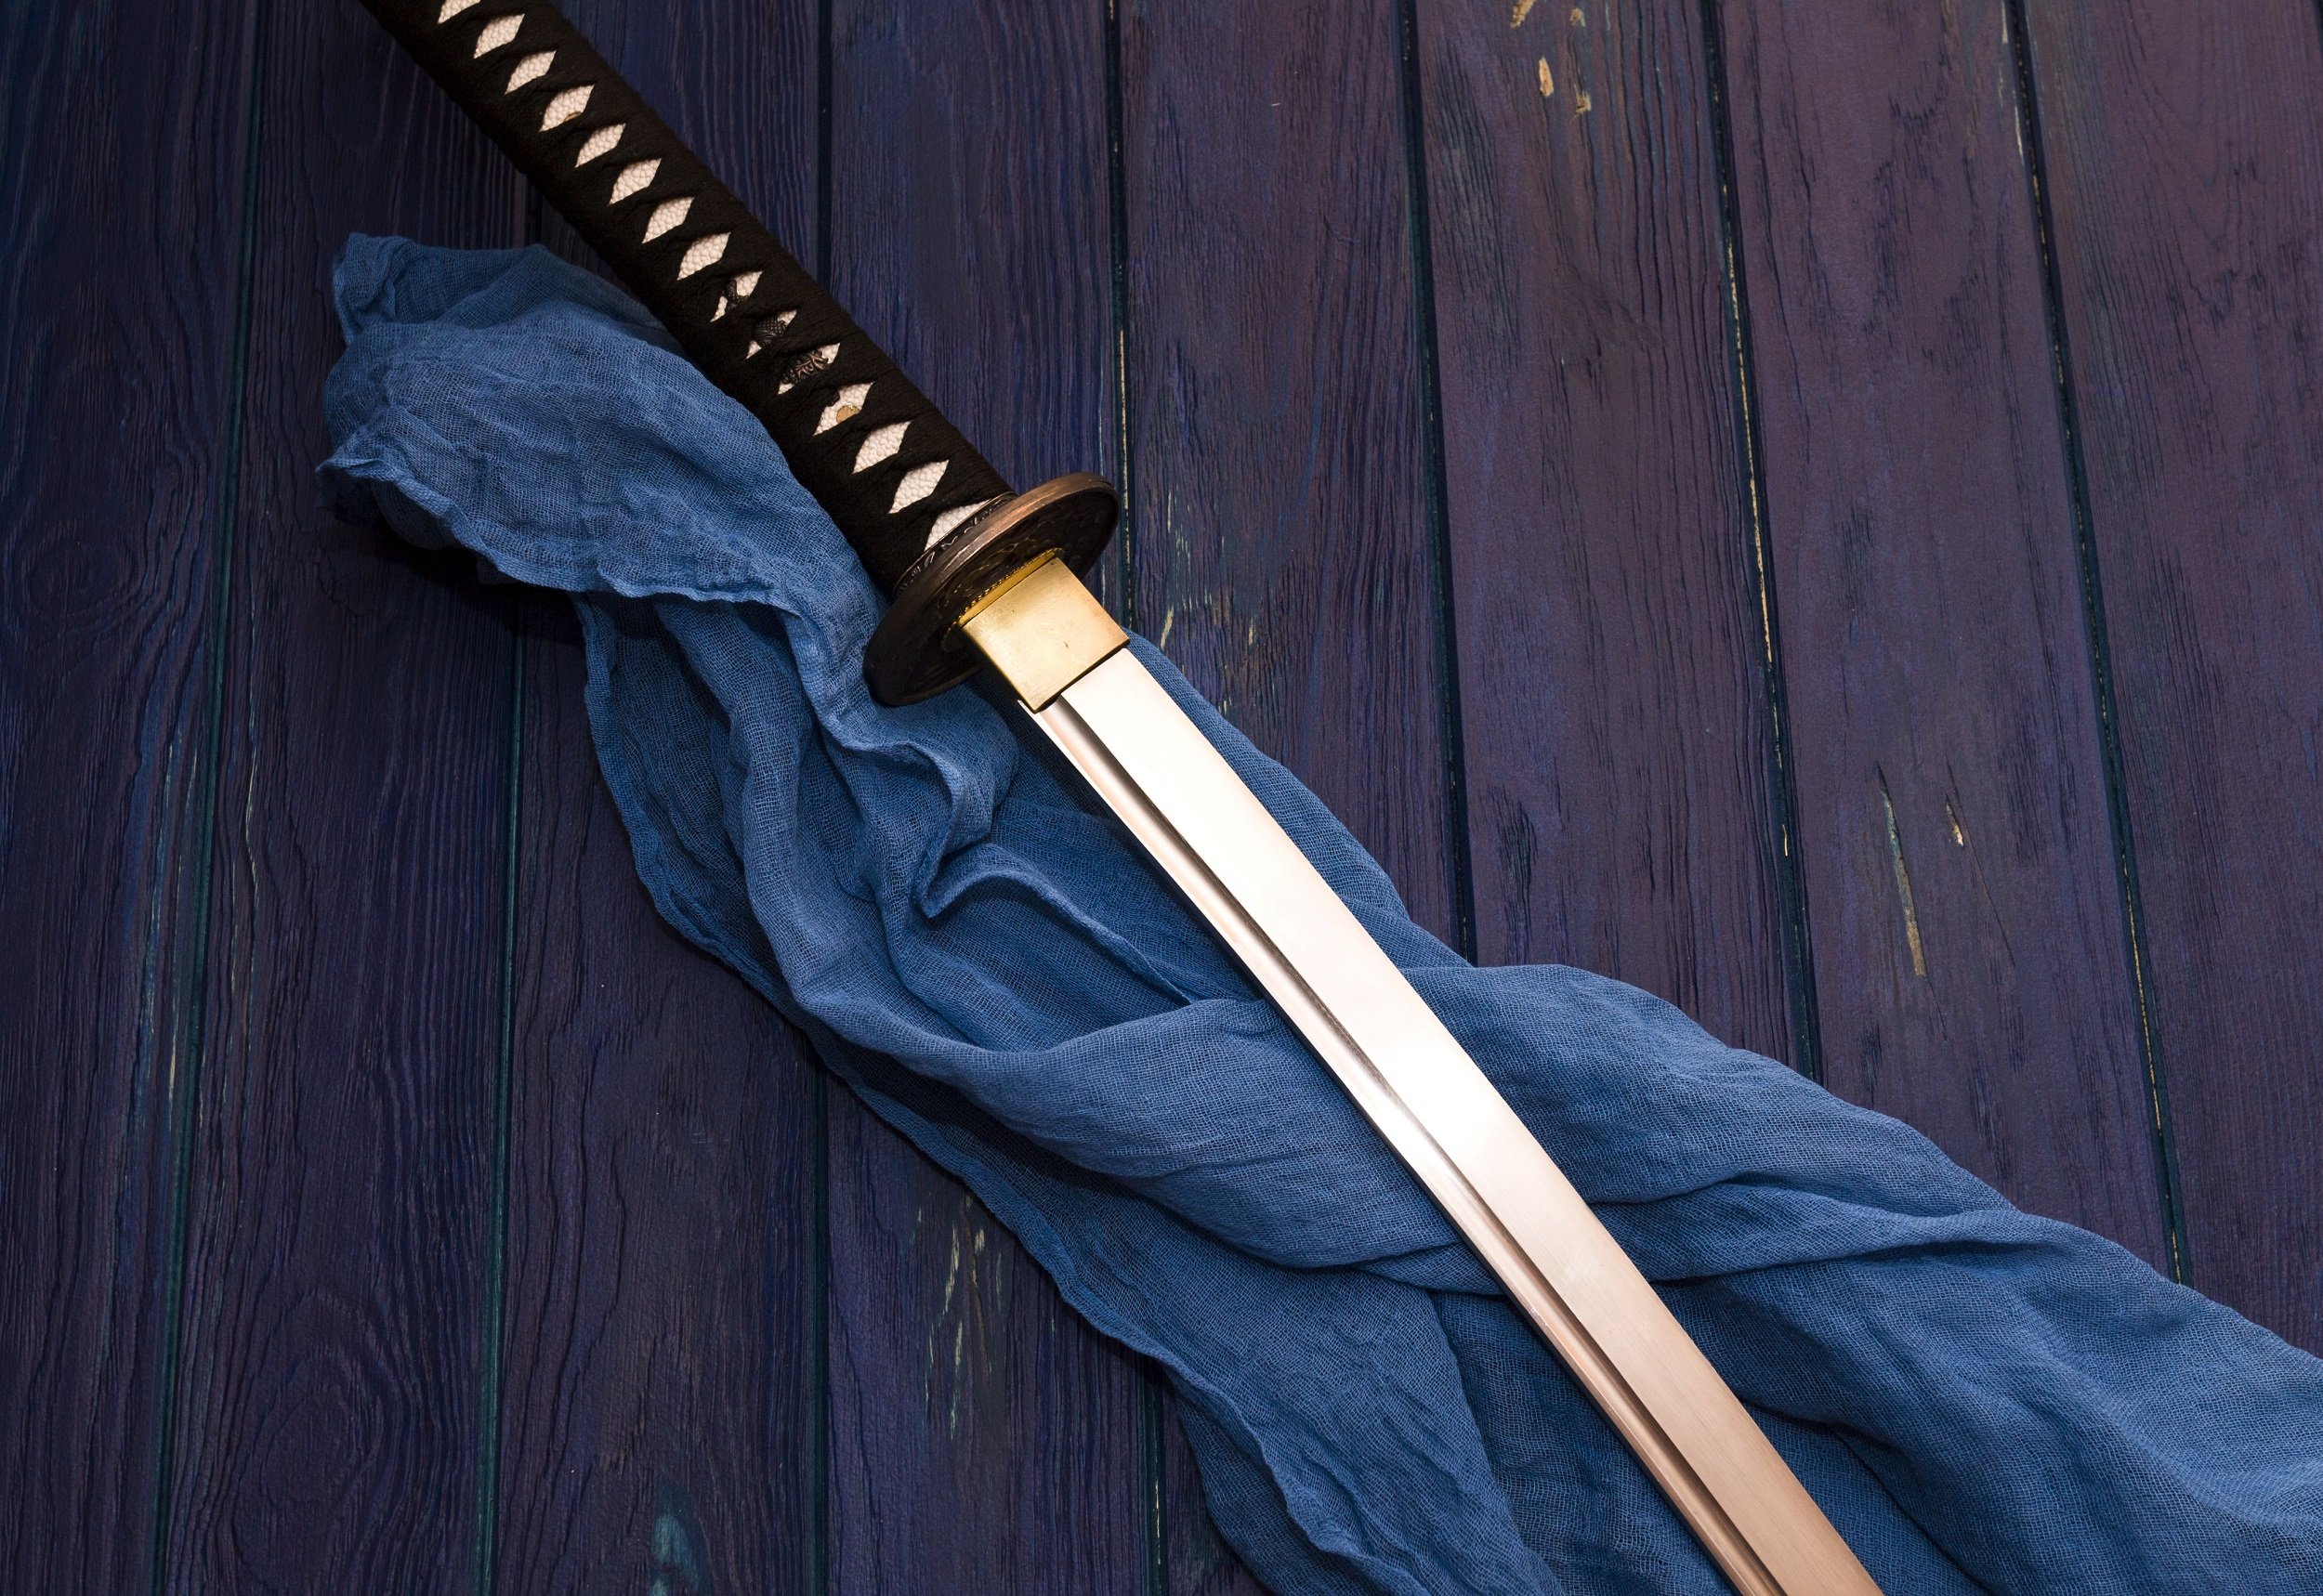 Discover The Sword Making Art On The Visit Magome On The 10 Day Samurai Experience Package Tour